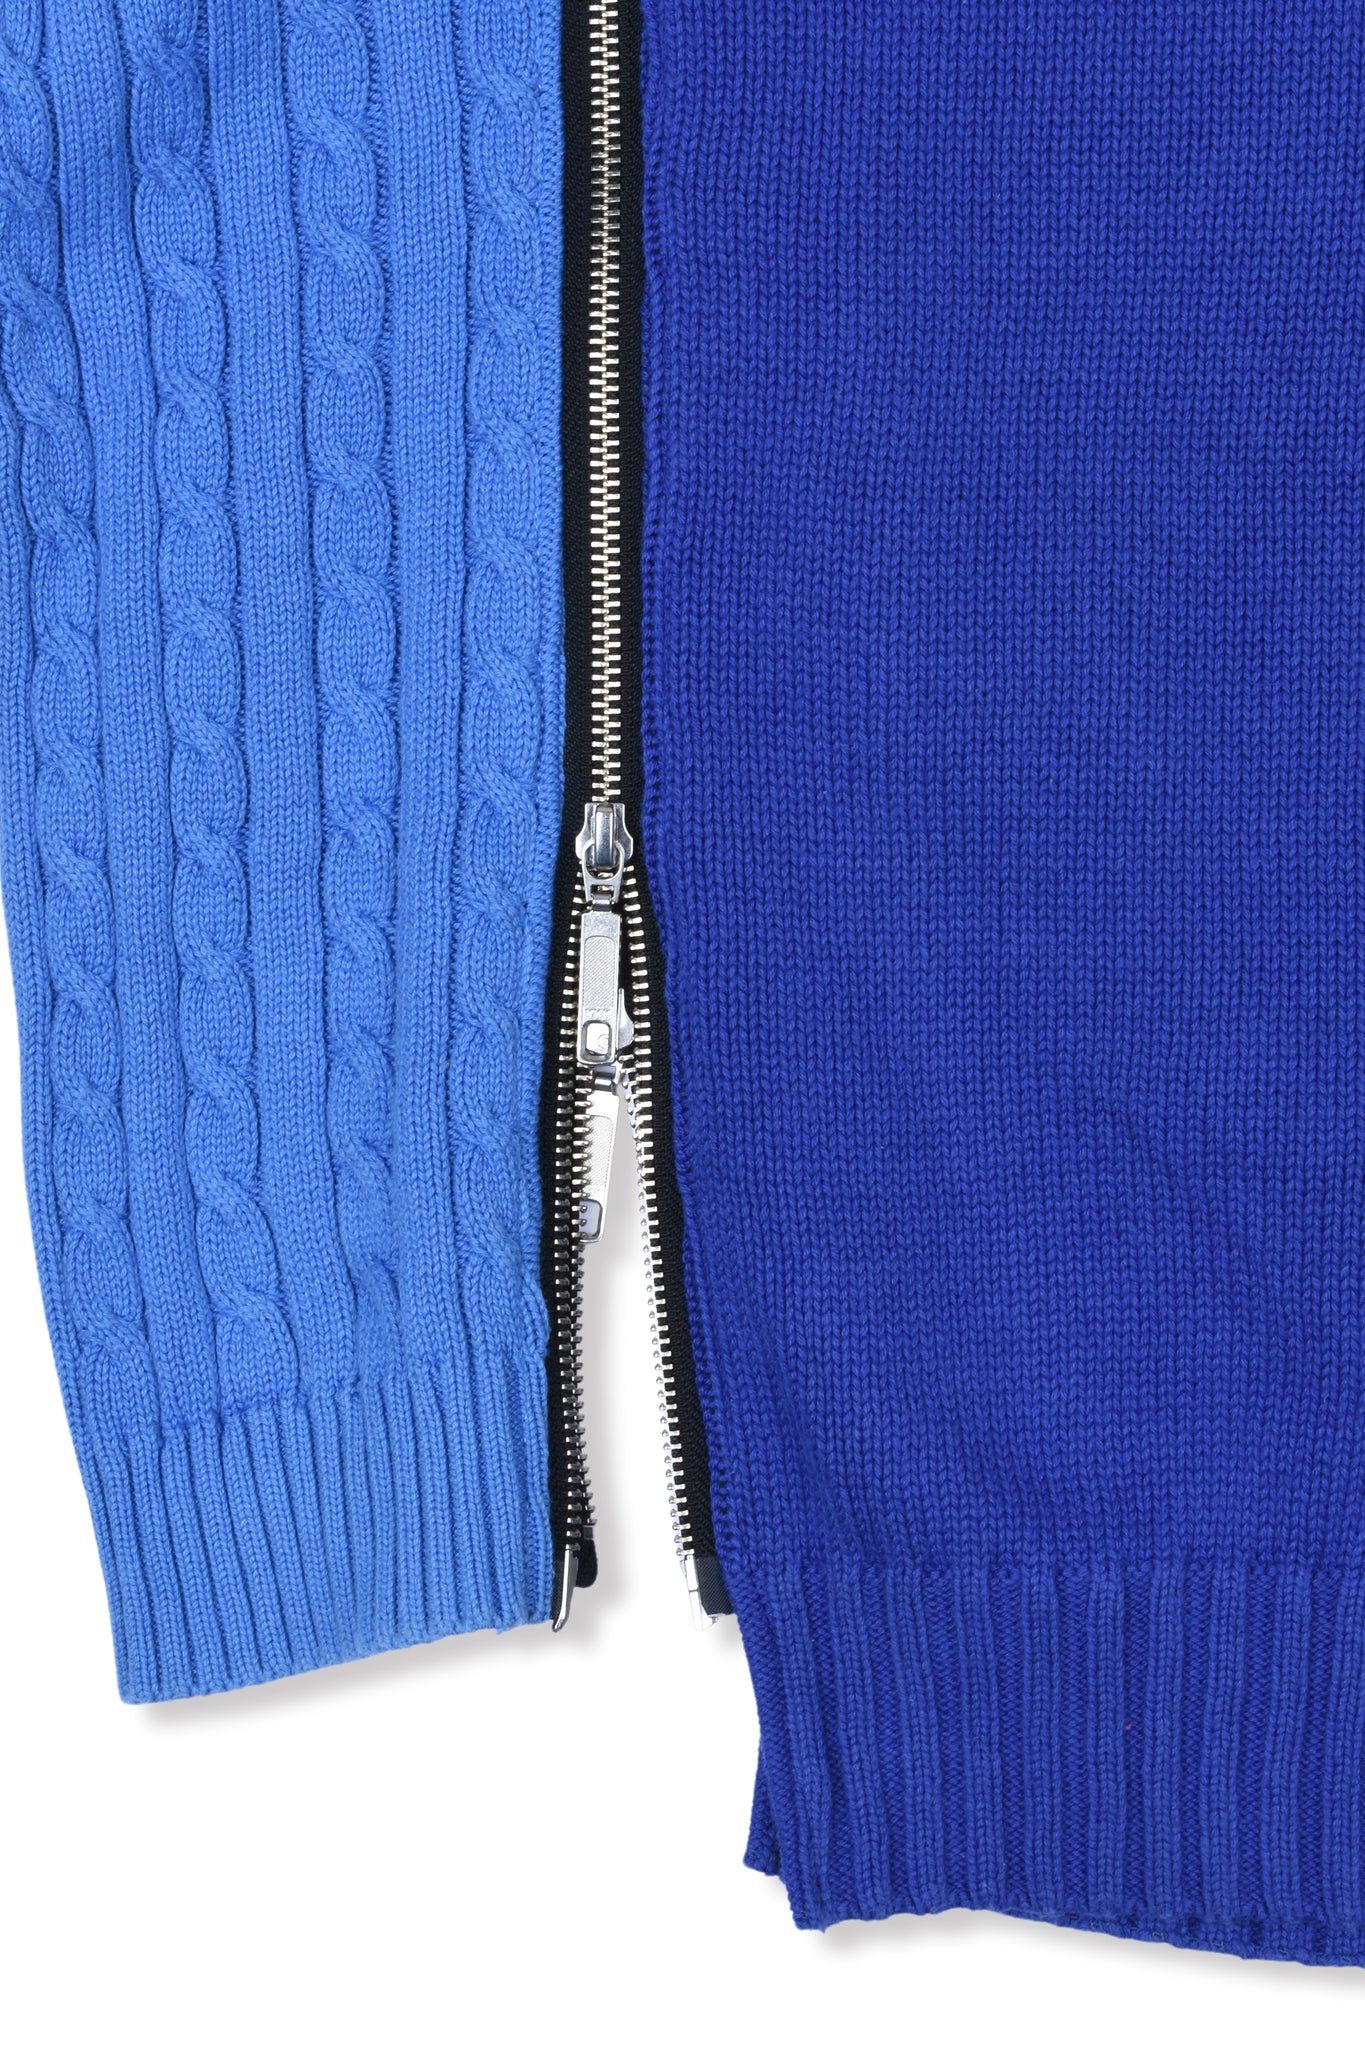 ONE-OFF FULLZIP KNIT6